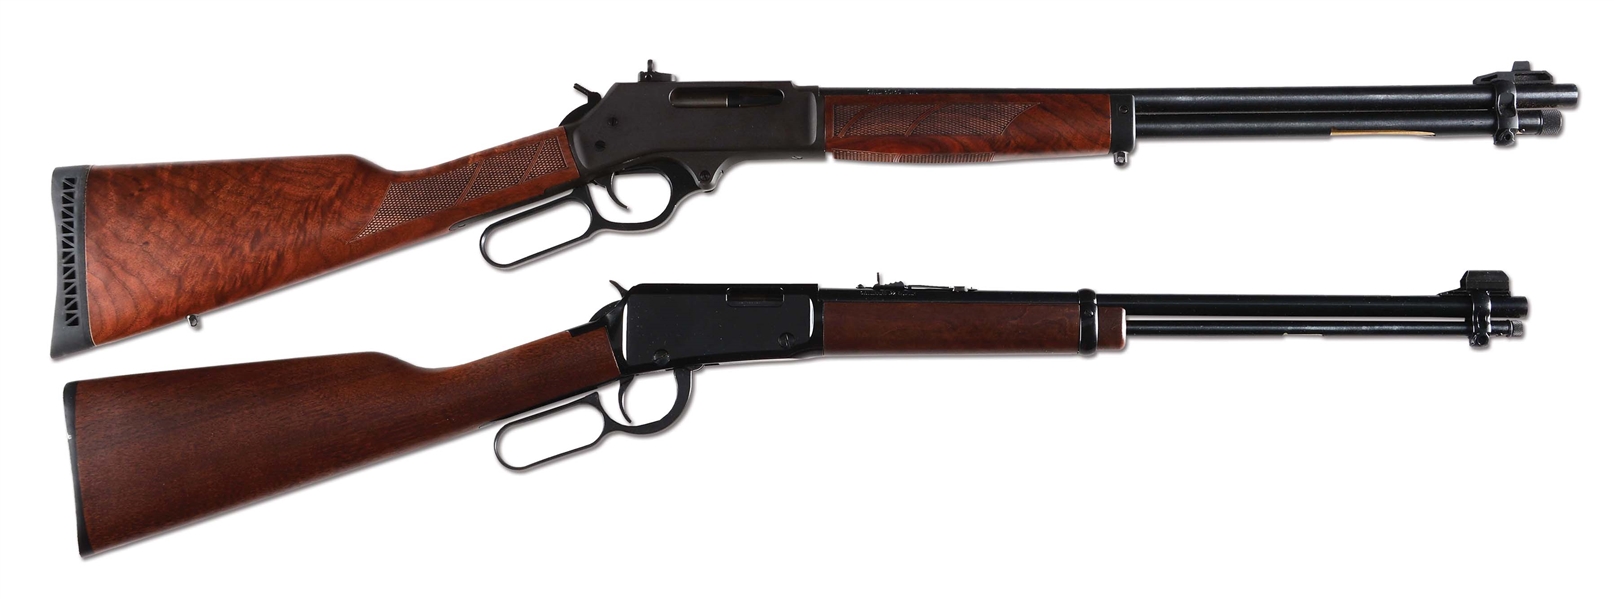 (M) LOT OF 2: ONE NIB HENRY H001 LEVER ACTION RIFLE AND ONE NIB HENRY H009 LEVER ACTION RIFLE.